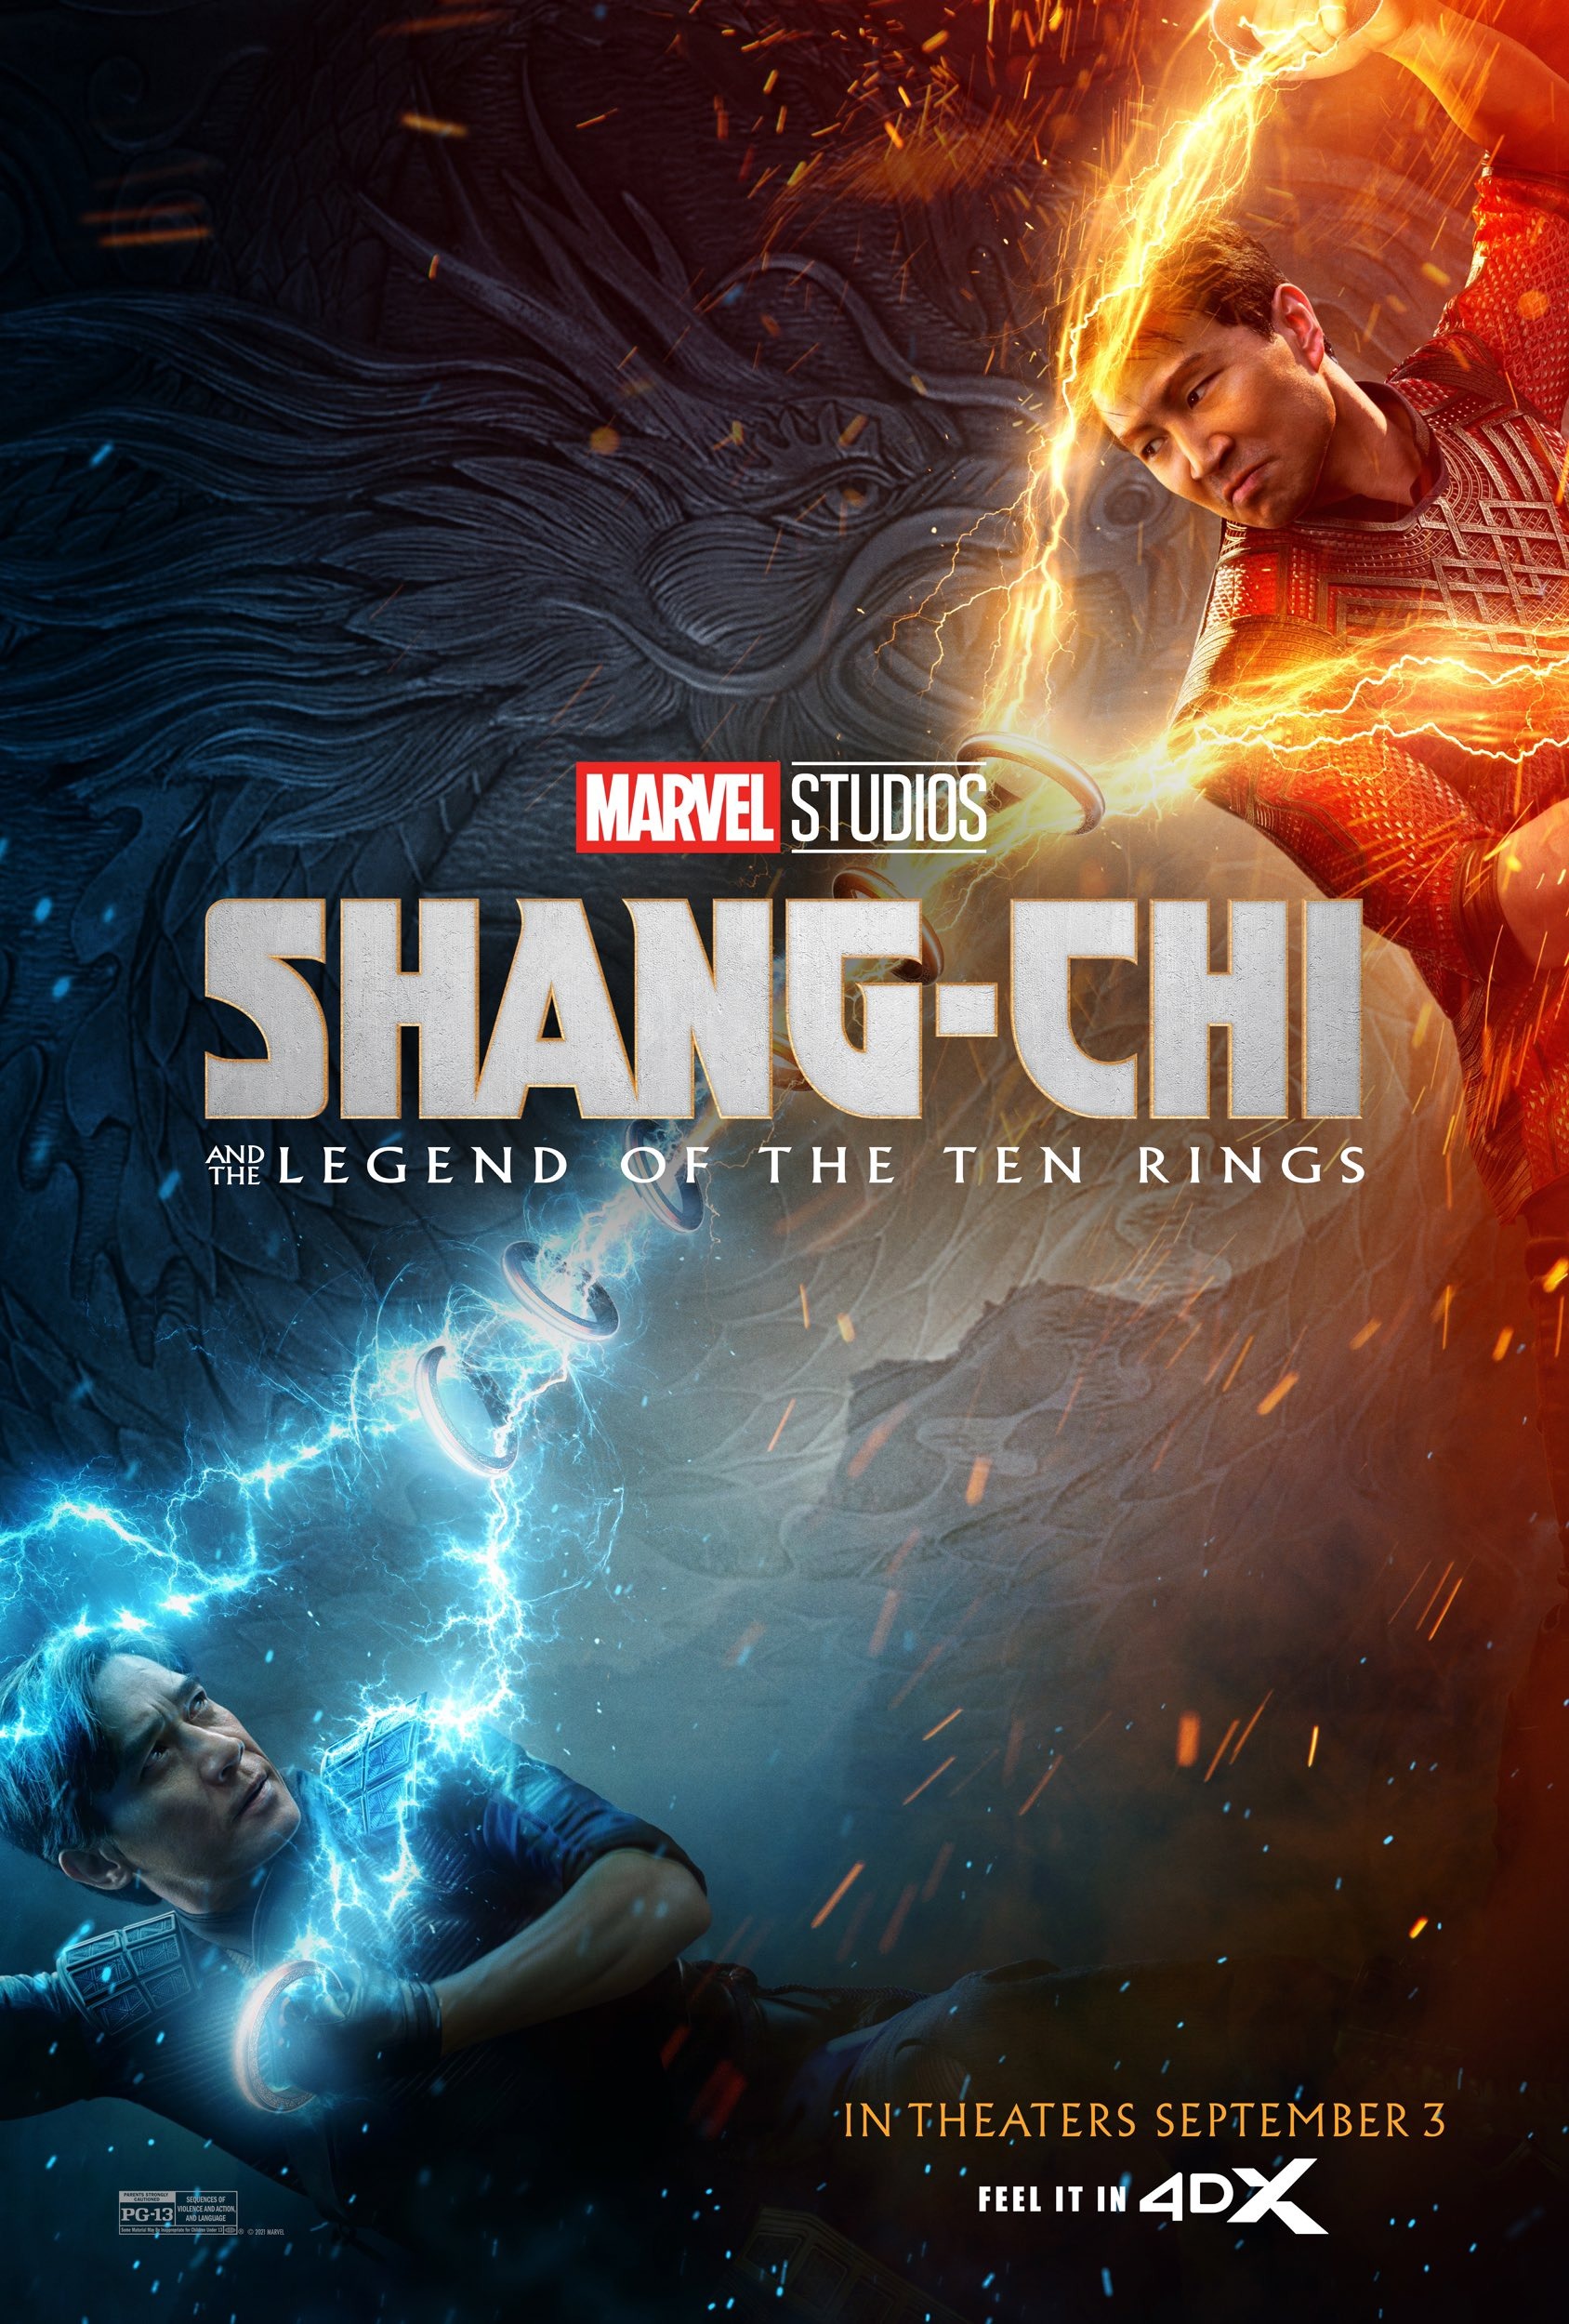 Mega Sized Movie Poster Image for Shang-Chi and the Legend of the Ten Rings (#11 of 20)